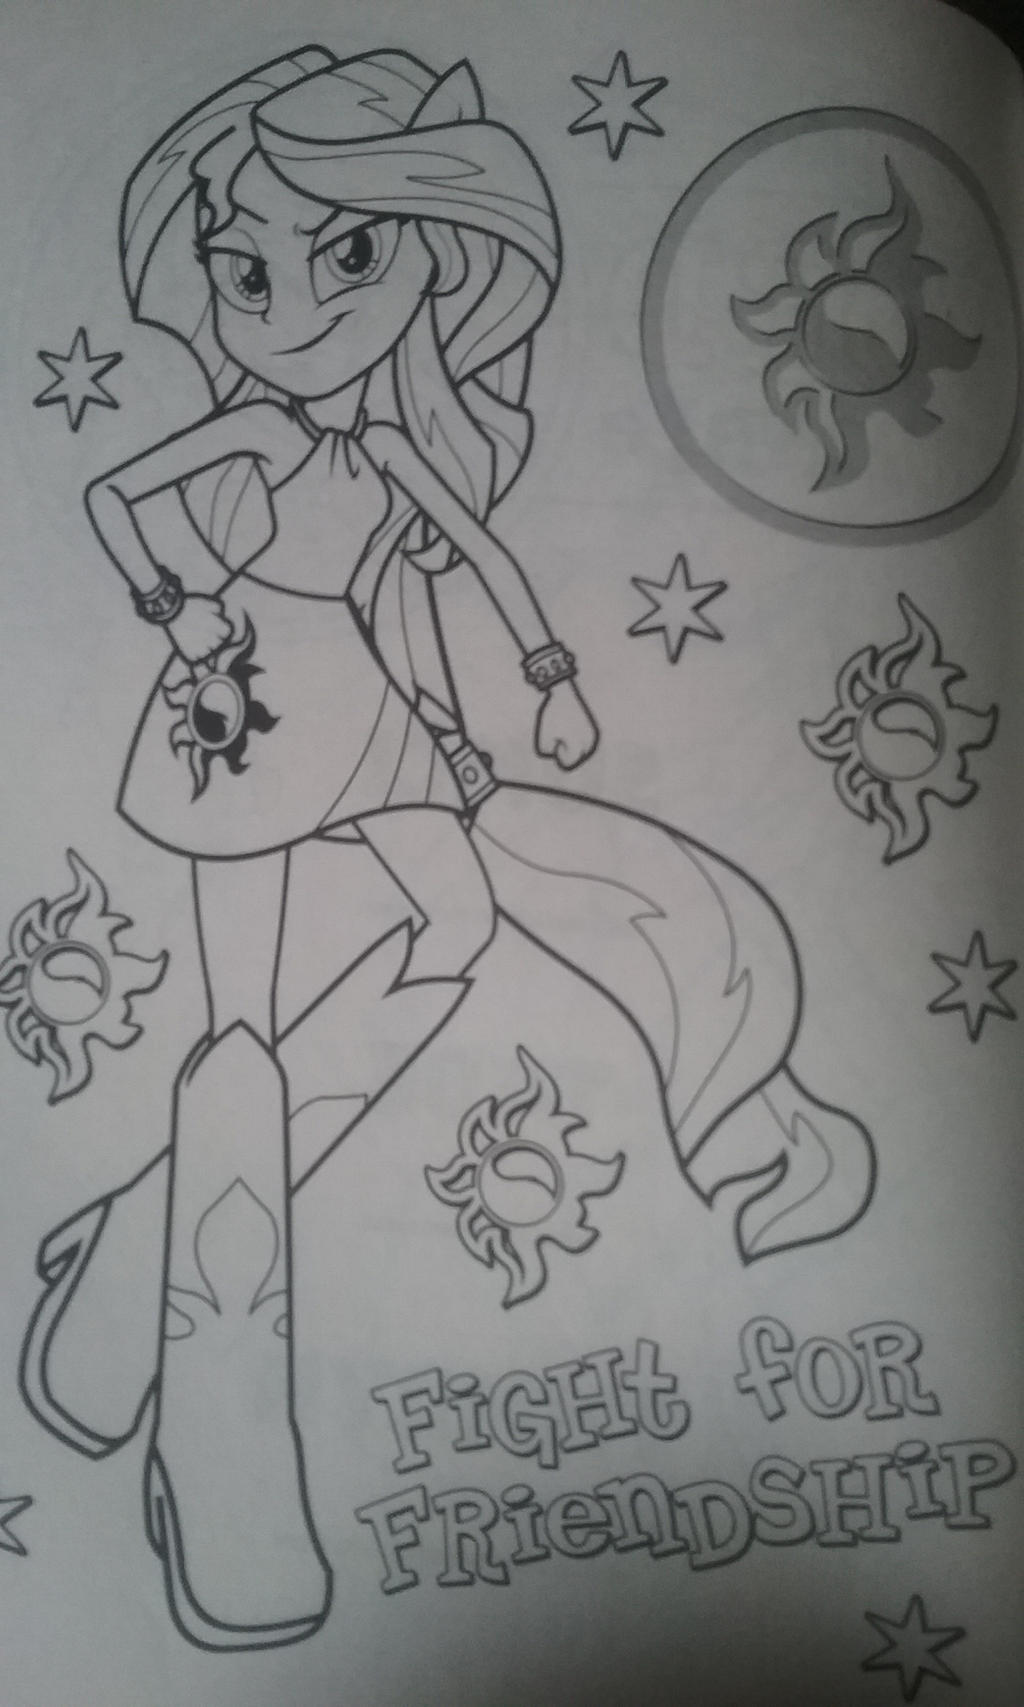 Equestria Girls Sunset Shimmer Coloring Page